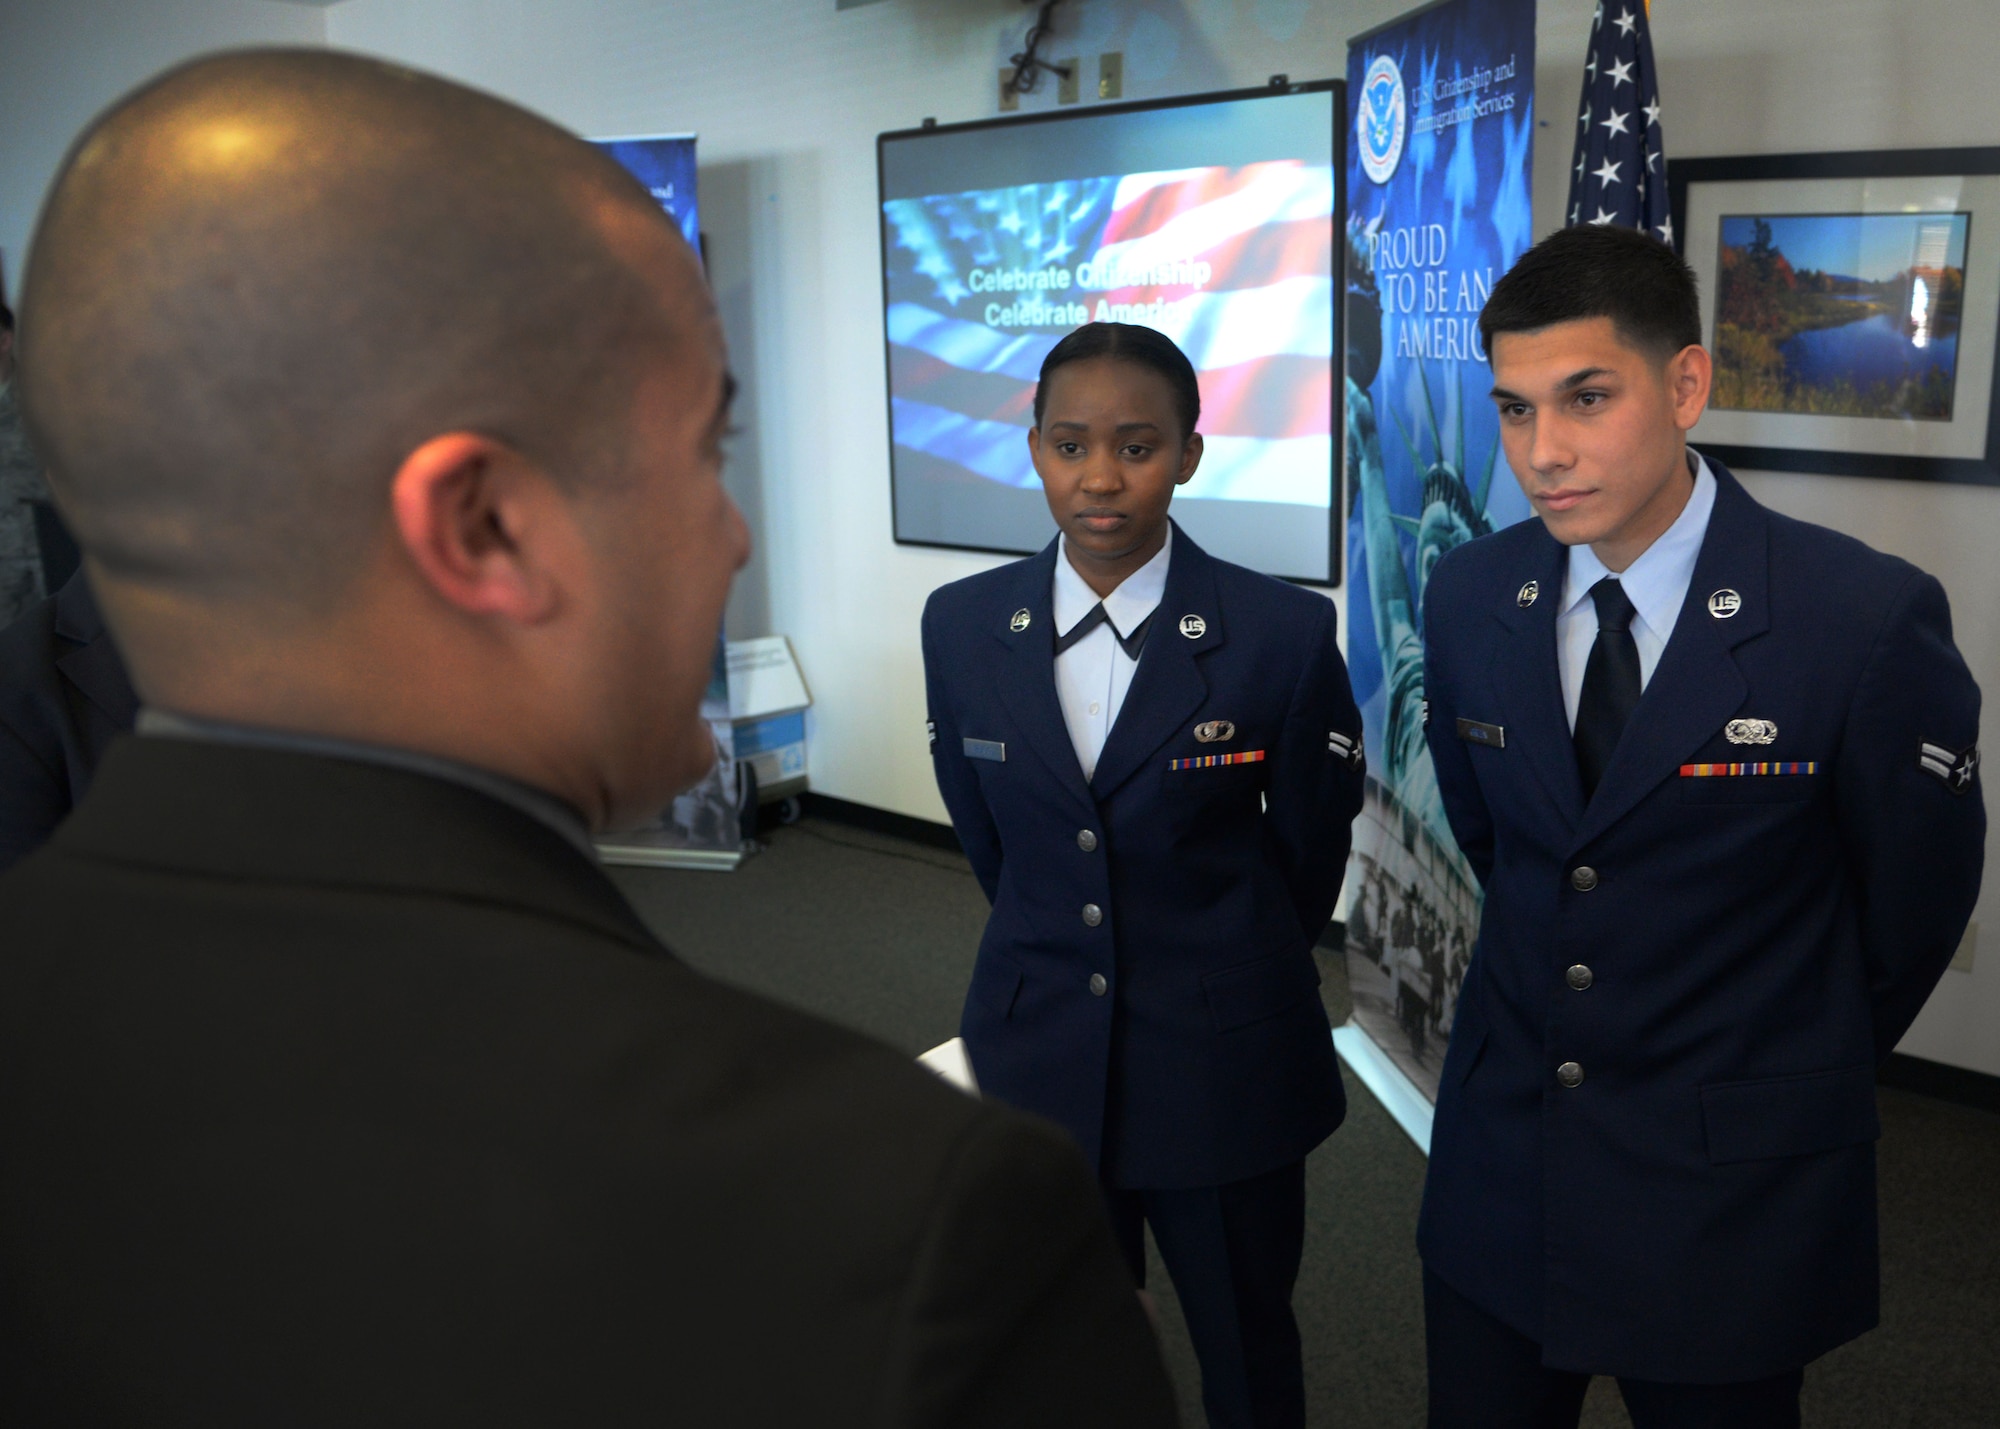 A representative from the United States Citizenship and Immigration Services field office in Albuquerque, New Mexico, speaks to U.S. Air Force Airman 1st Class Dominik Green, 27th Special Operations Logistics Readiness Squadron storage and issue specialist, and Airman 1st Class Rehema Mburugu, 27th Special Operations Contracting Squadron contract specialist, during a naturalization ceremony March 20, 2015 at Cannon Air Force Base, N.M. Four applicants were presented with their U.S. citizenship, representing four countries of origin during the ceremony. (U.S. Air Force photo/Staff Sgt. Alex Mercer)